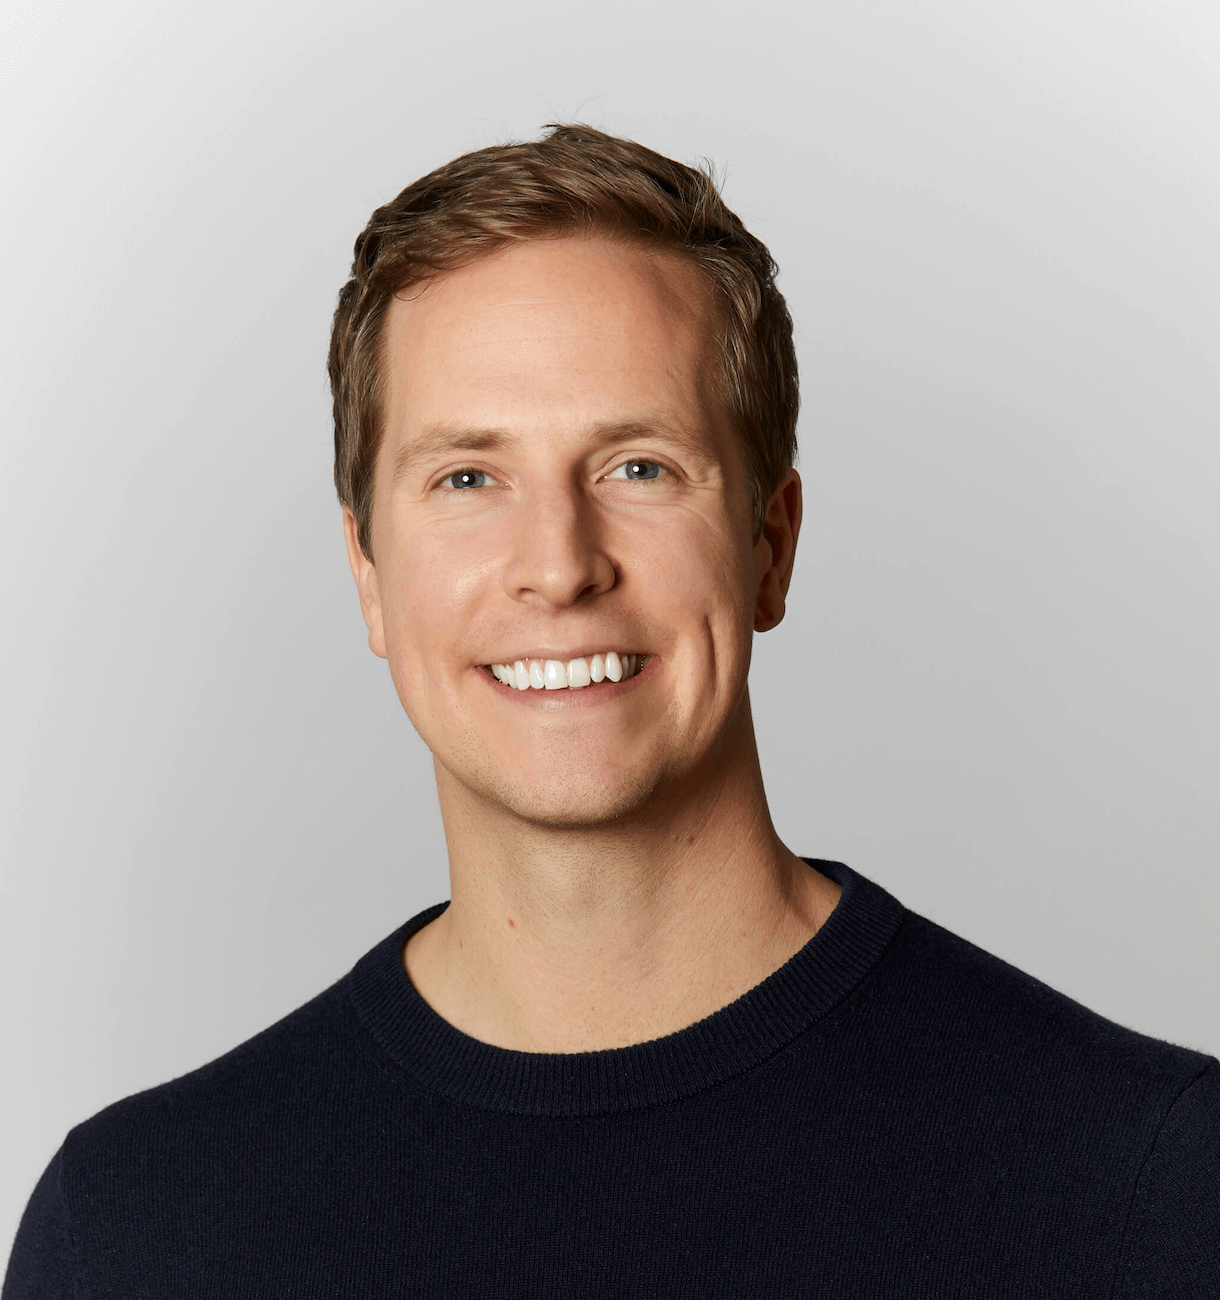 Evan Smith, Co-Founder and Chief Executive Officer